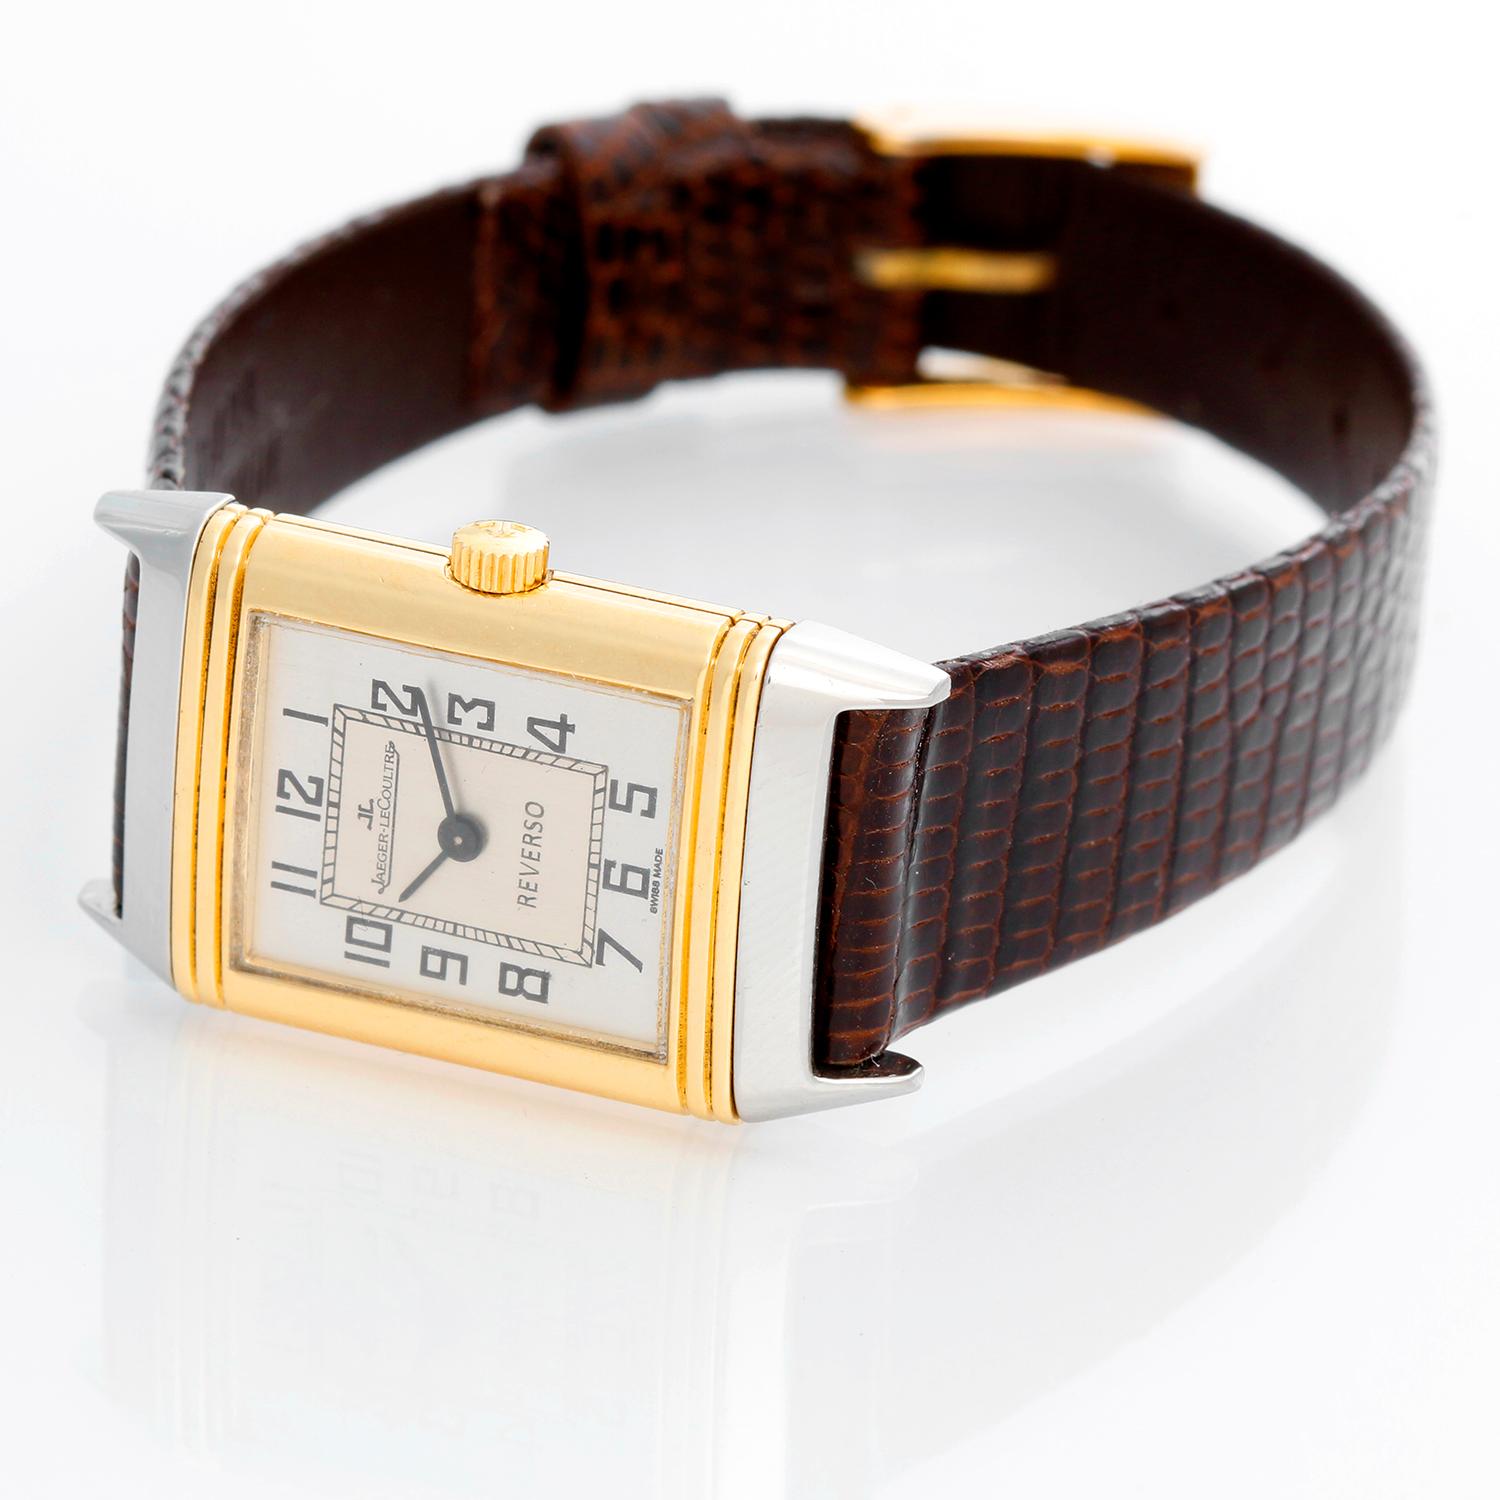 Jaeger-LeCoultre Reverso 2-Tone Ladies Watch 140.025.5 - Quartz. Stainless Steel and 18k yellow gold case reverses to solid high polished gold cover (19mm x 33mm). Silver dial with Arabic numerals . Black leather Jager Le-Coultre strap with Jager